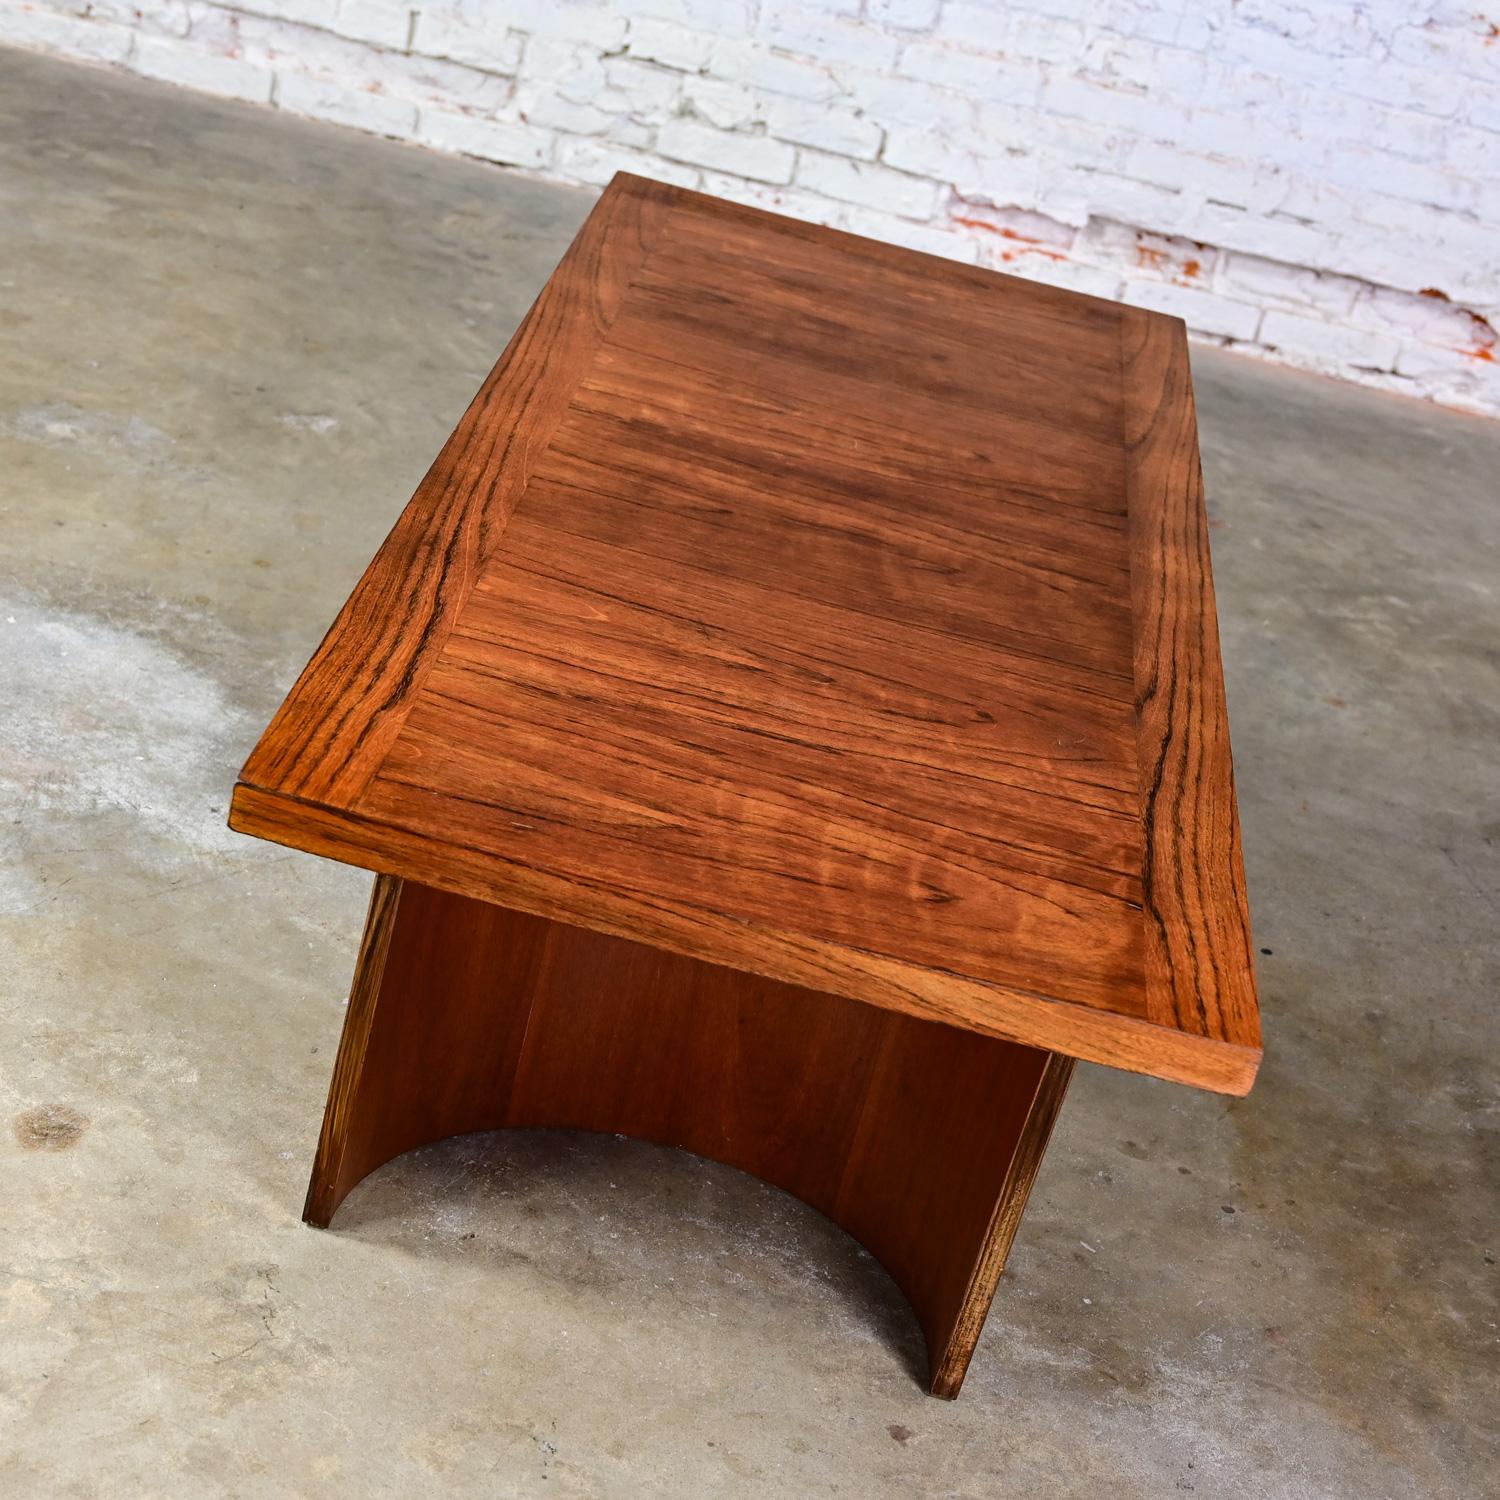 1970’s Modern Coffee Table Kroehler Rectangle Top Bentwood Curved Double U Base For Sale 2